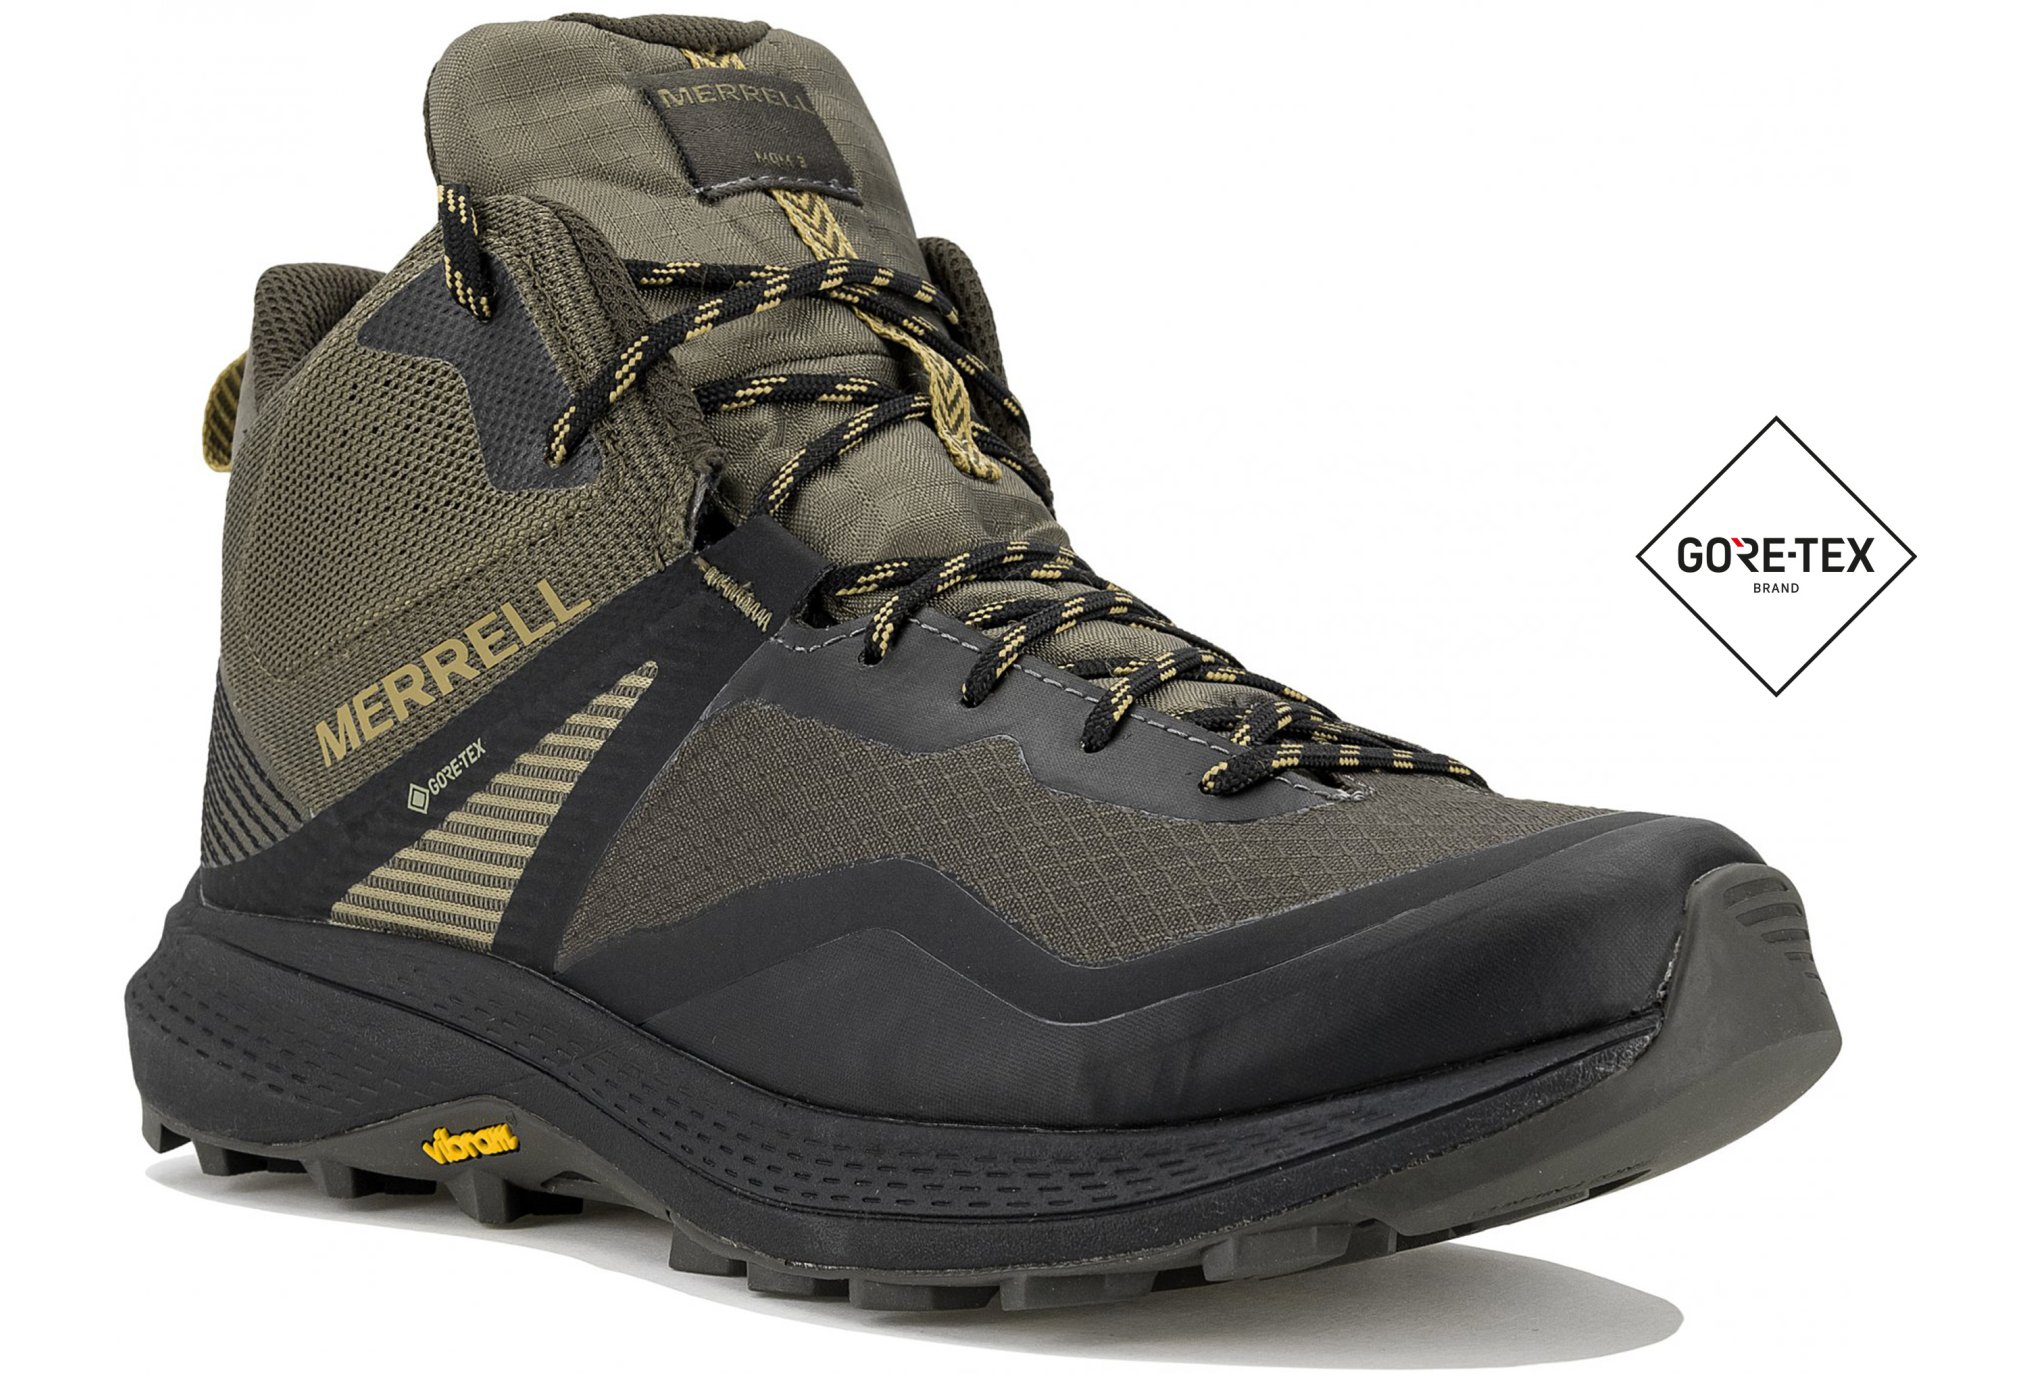 Merrell MQM 3 Mid Gore-Tex M Chaussures homme déstockage